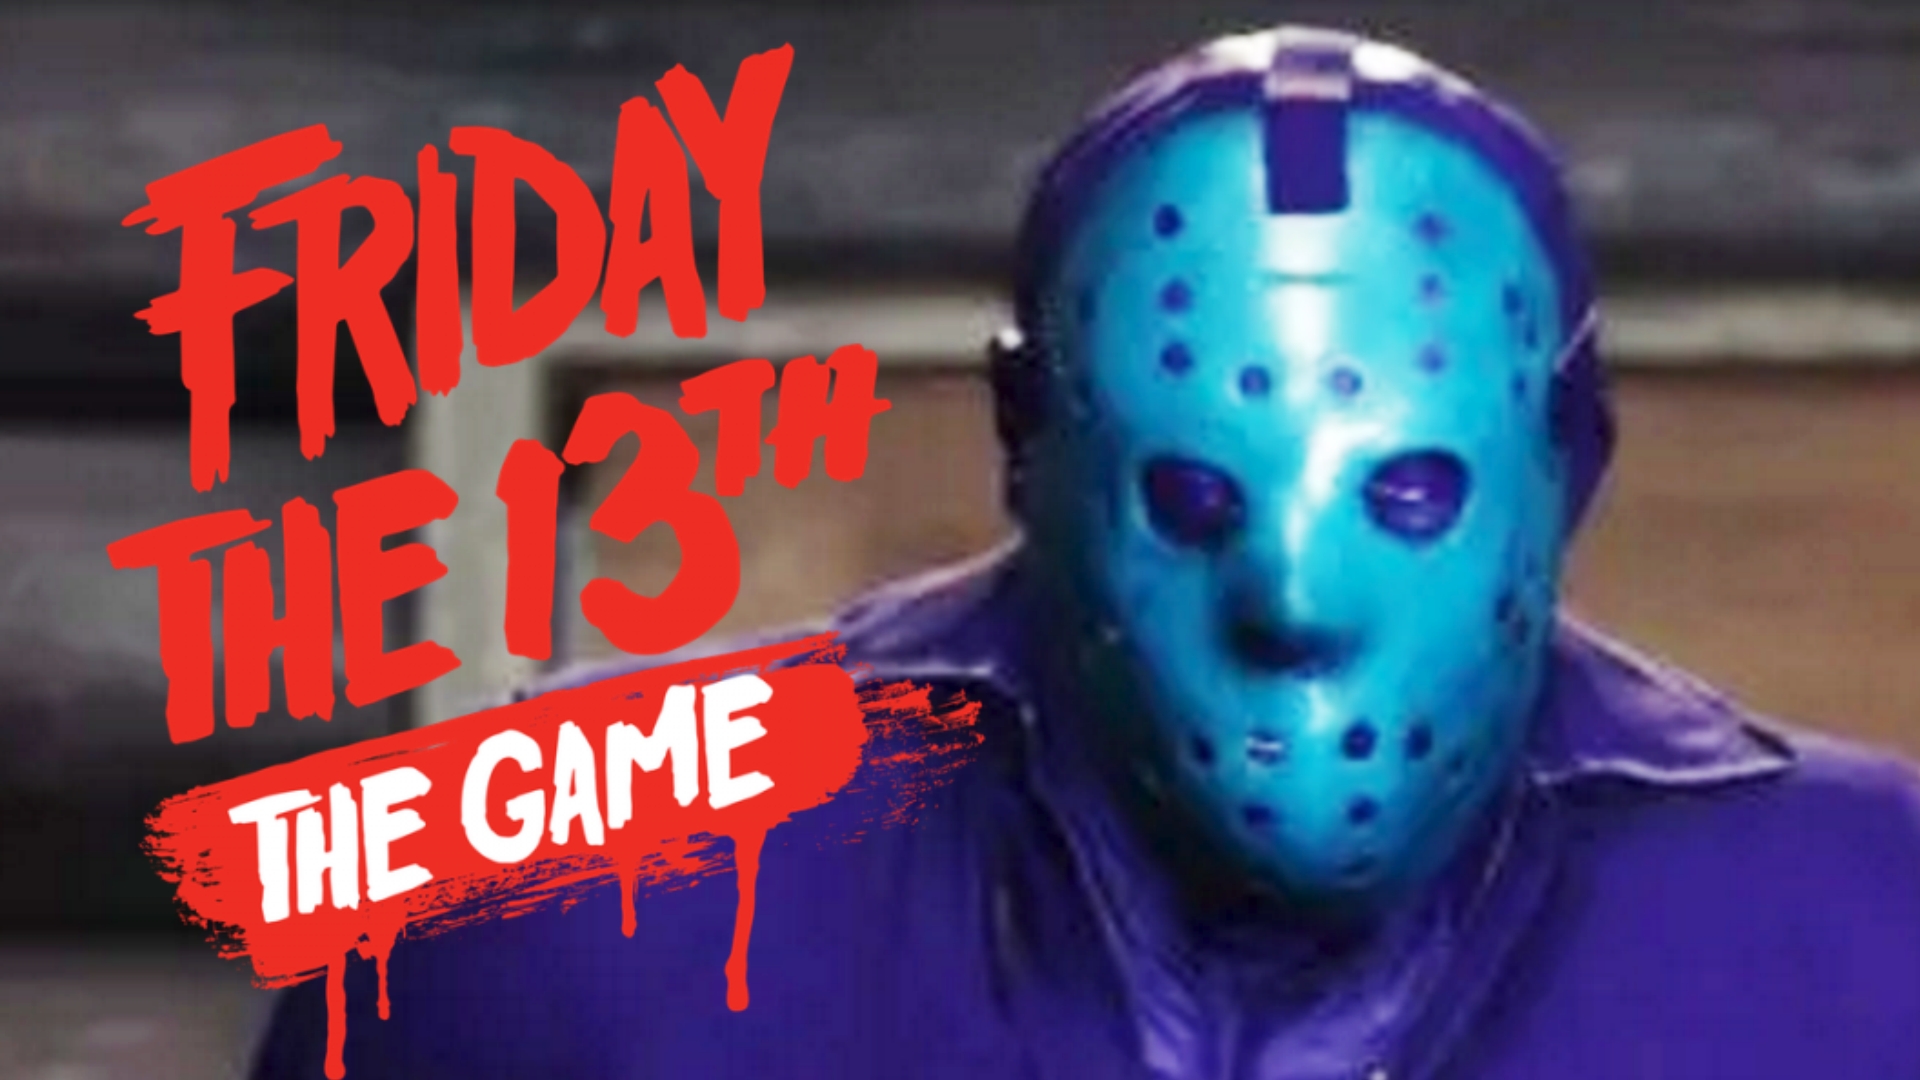 Friday the 13th: The Game - 8 Bit NES Jason